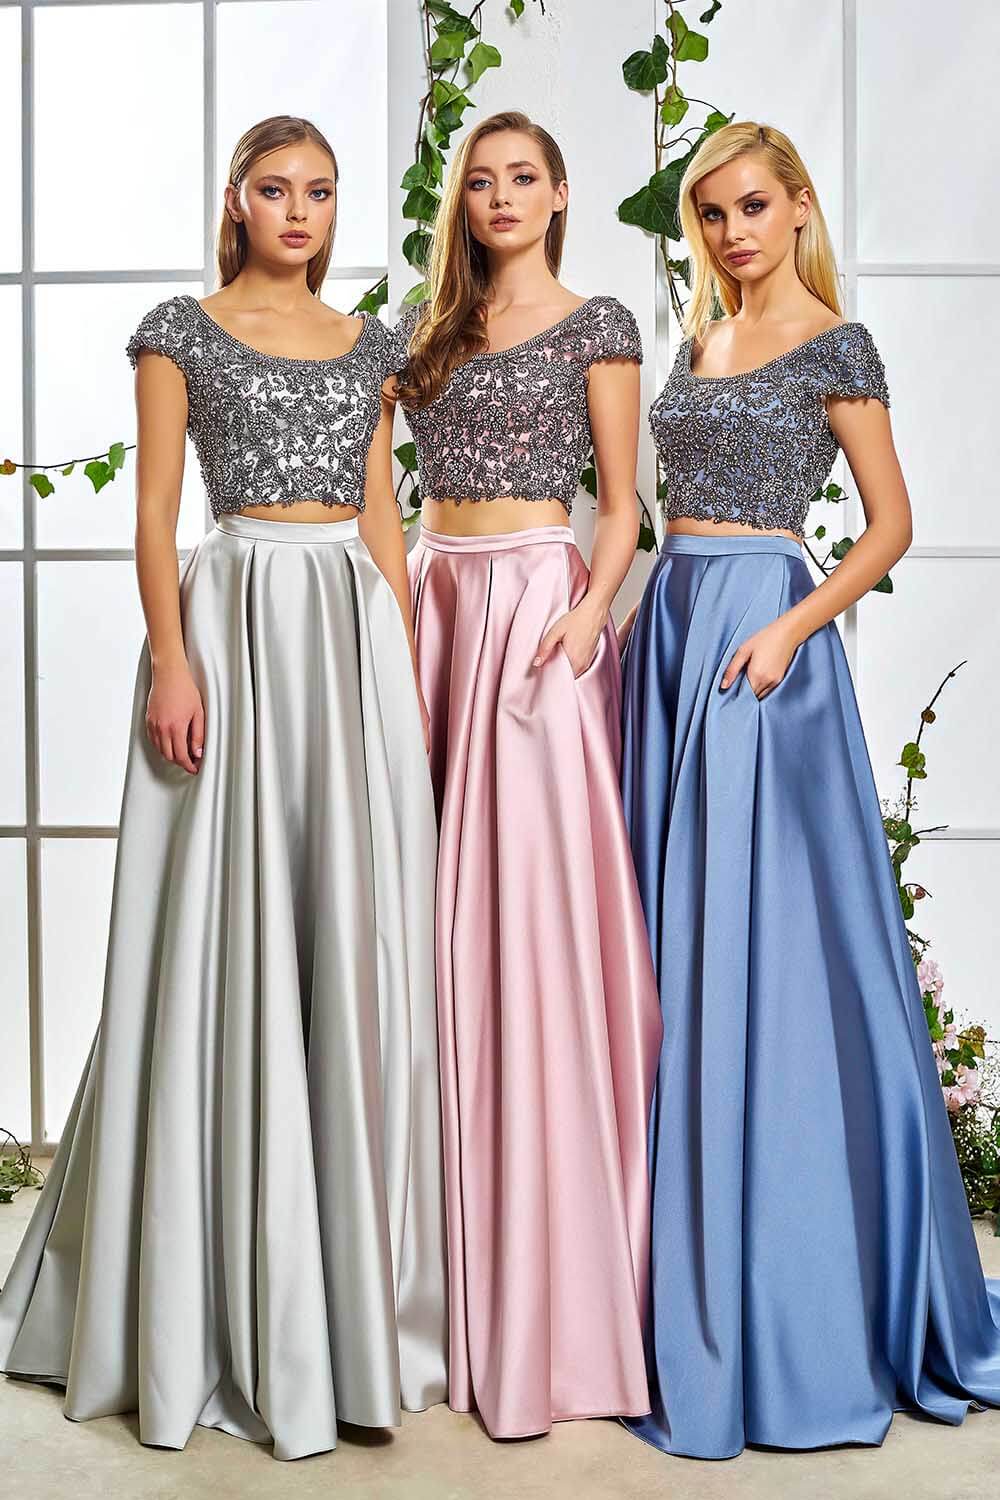 Satin Skirt Long Evening Dress With Stones On Top